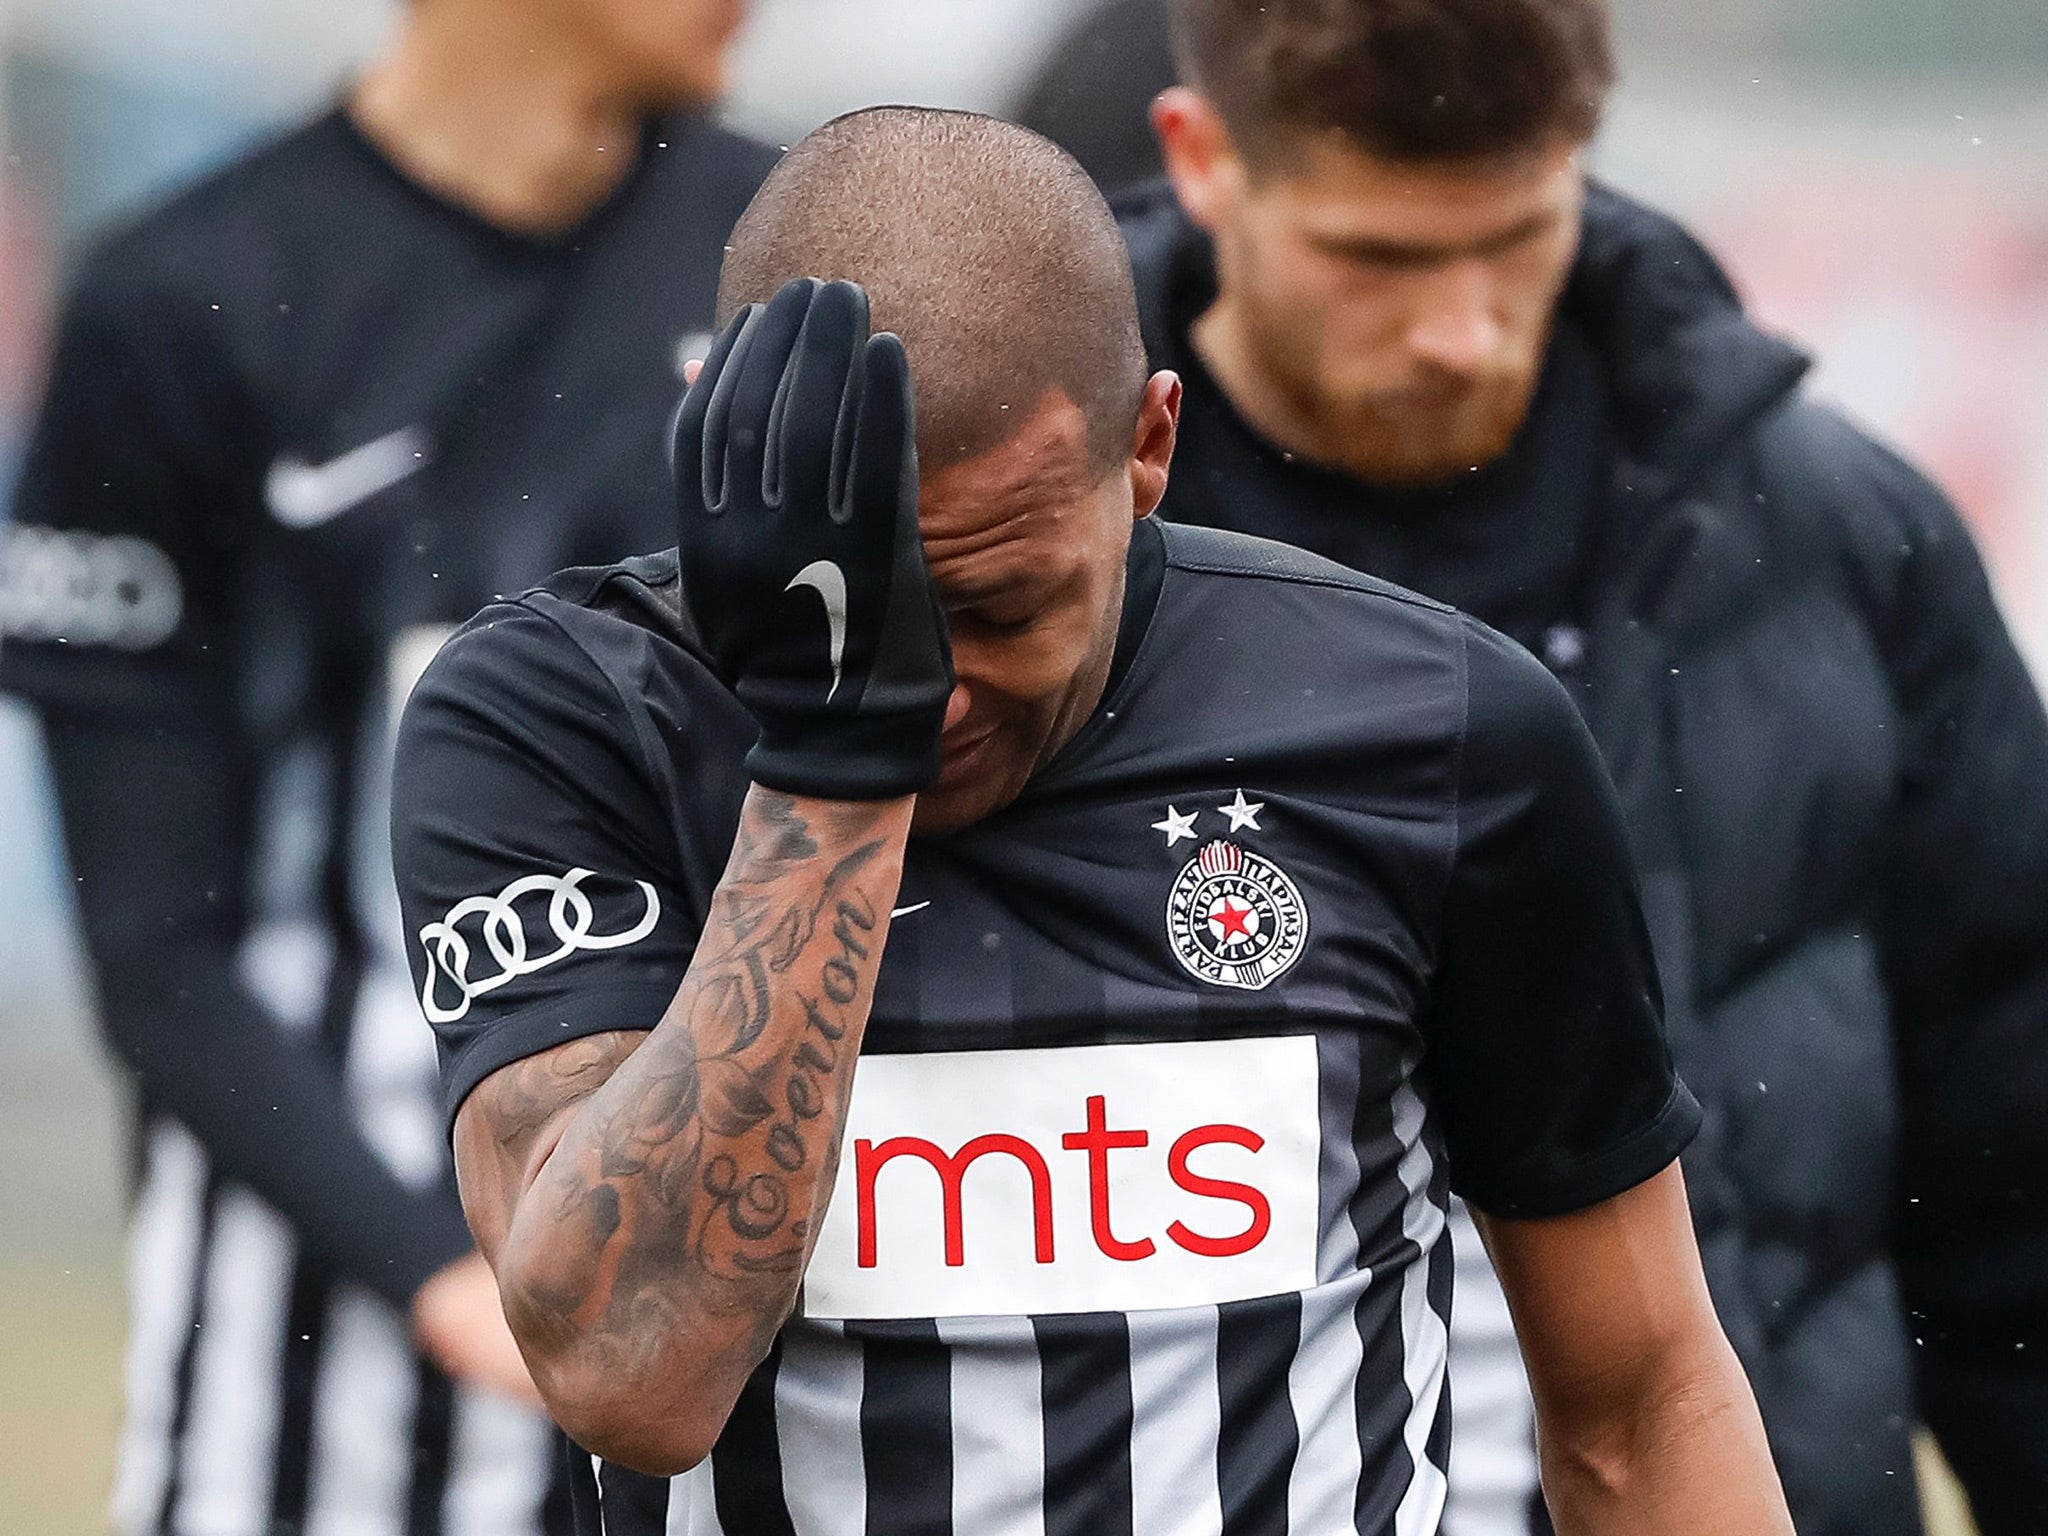 Partizan's Everton Luiz left the pitch in a clear state of distress after the final whistle